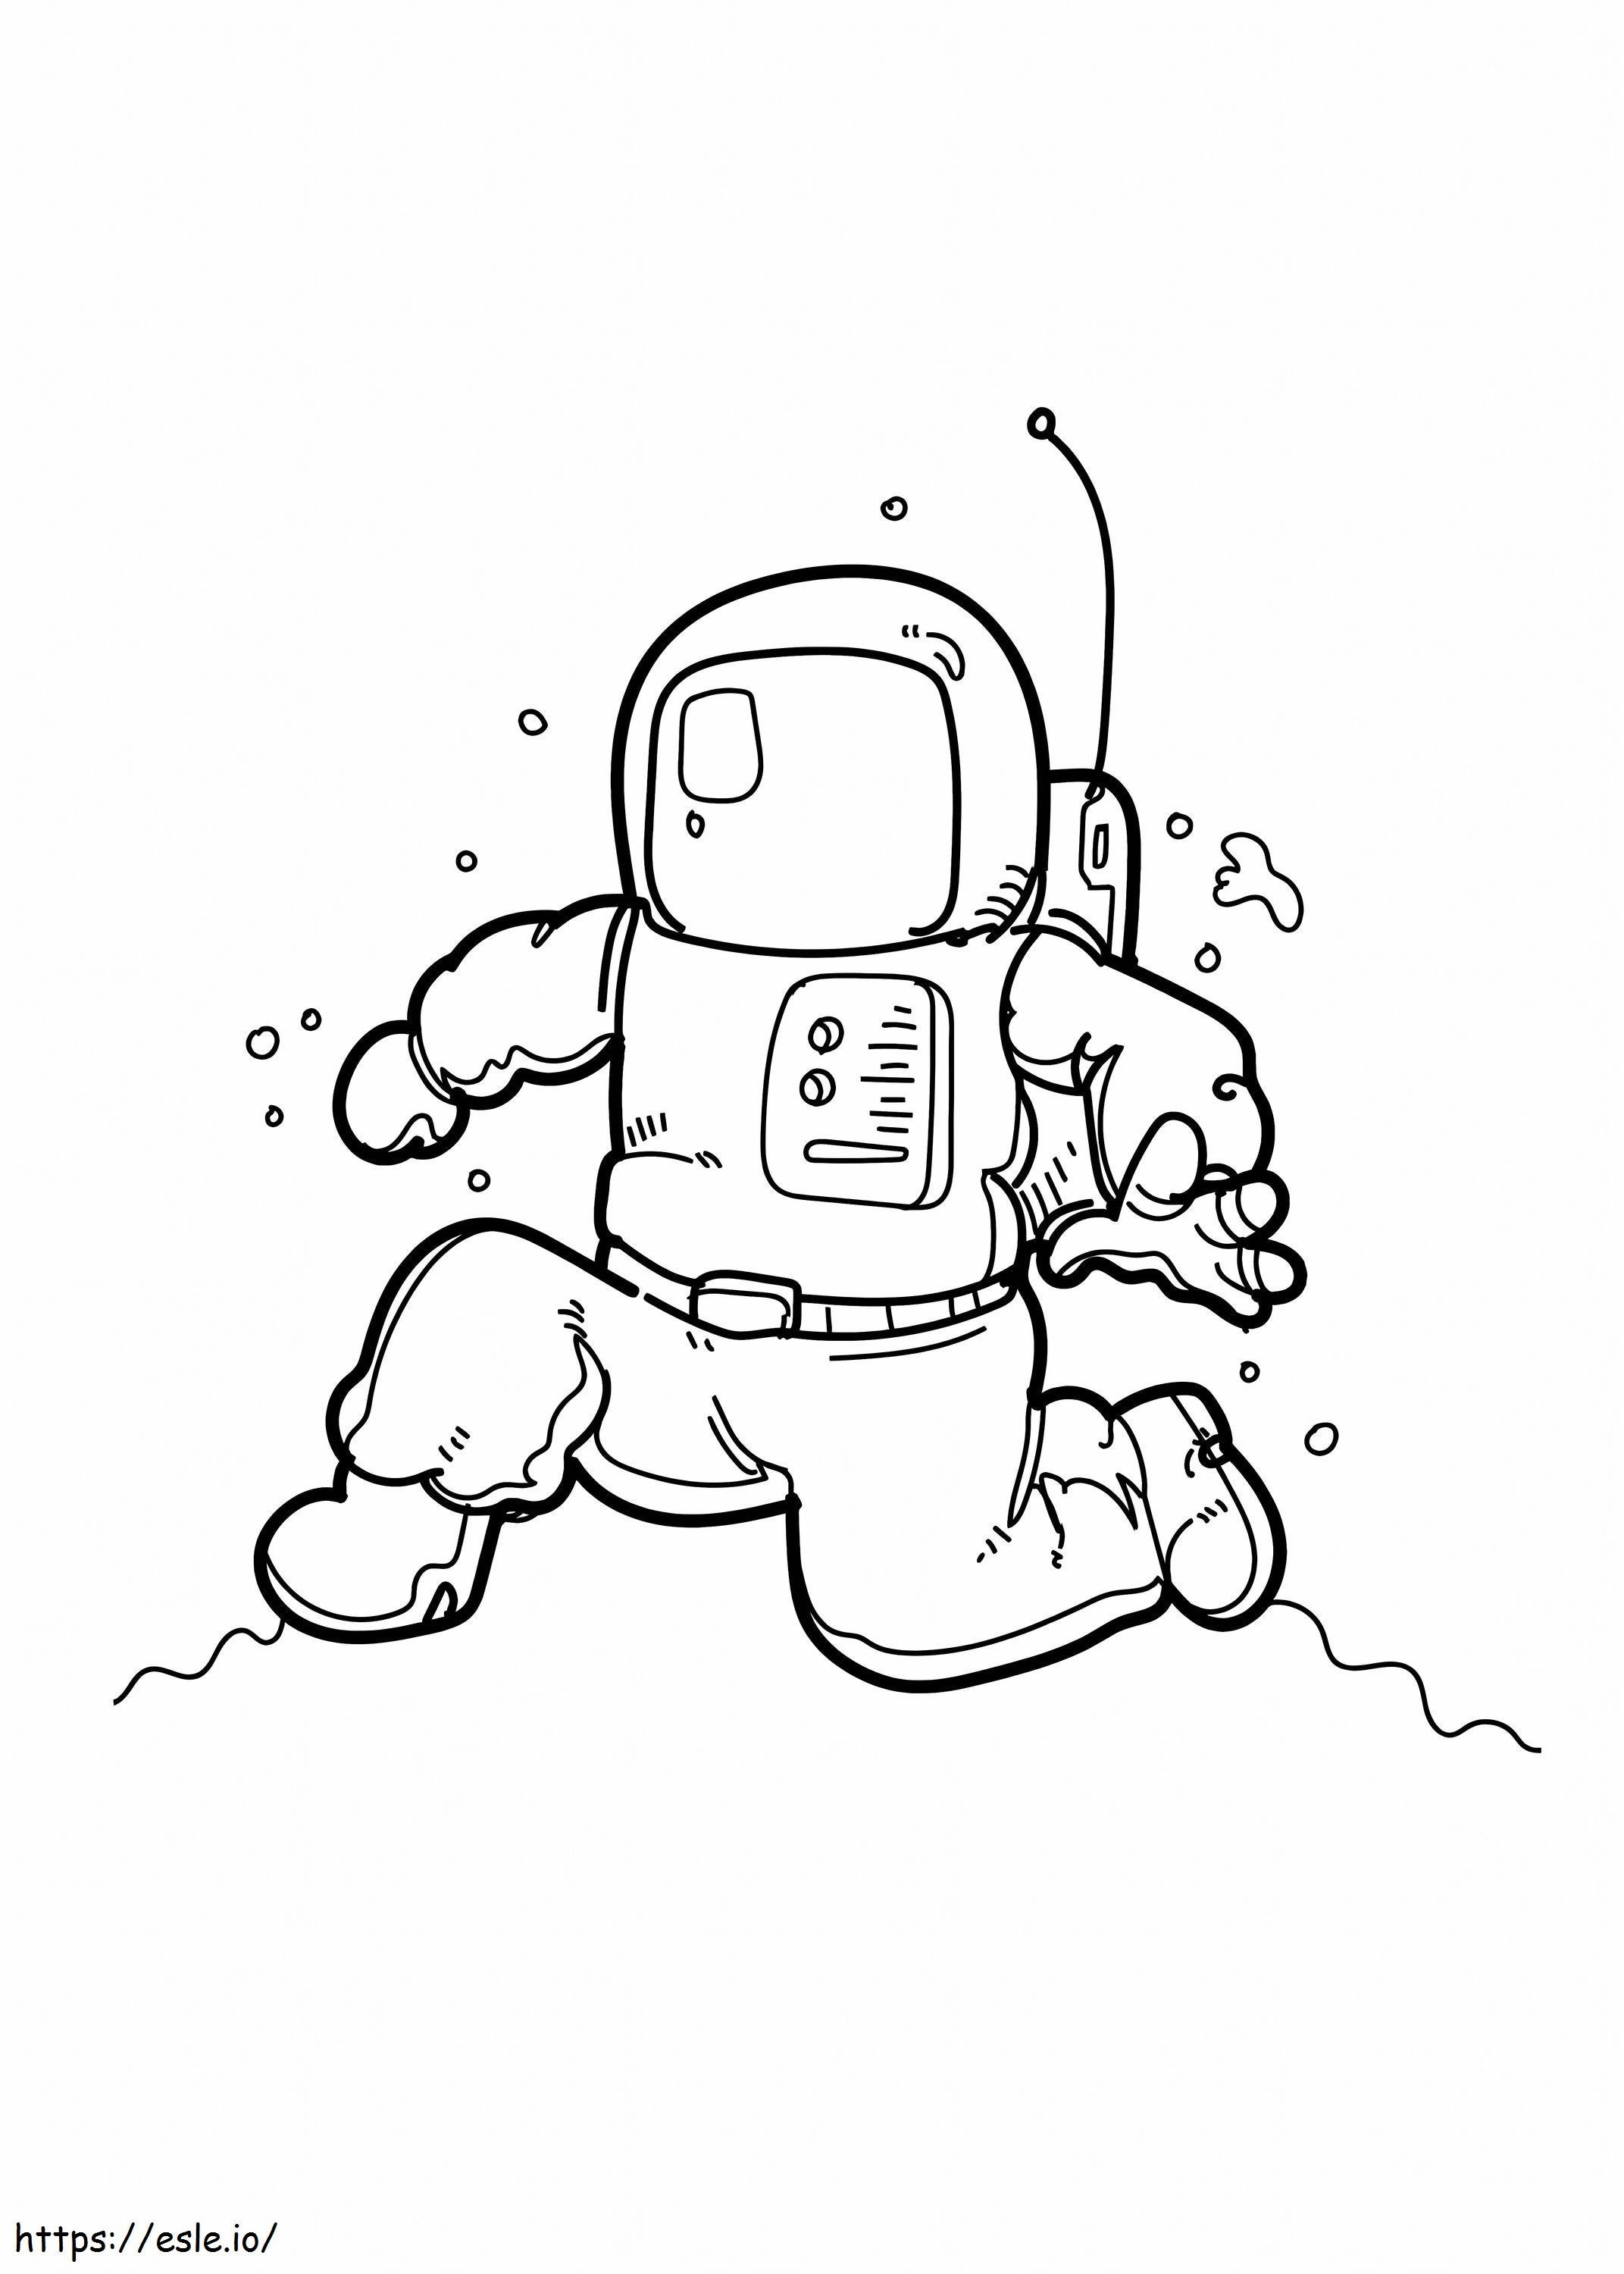 Astronaut Running coloring page